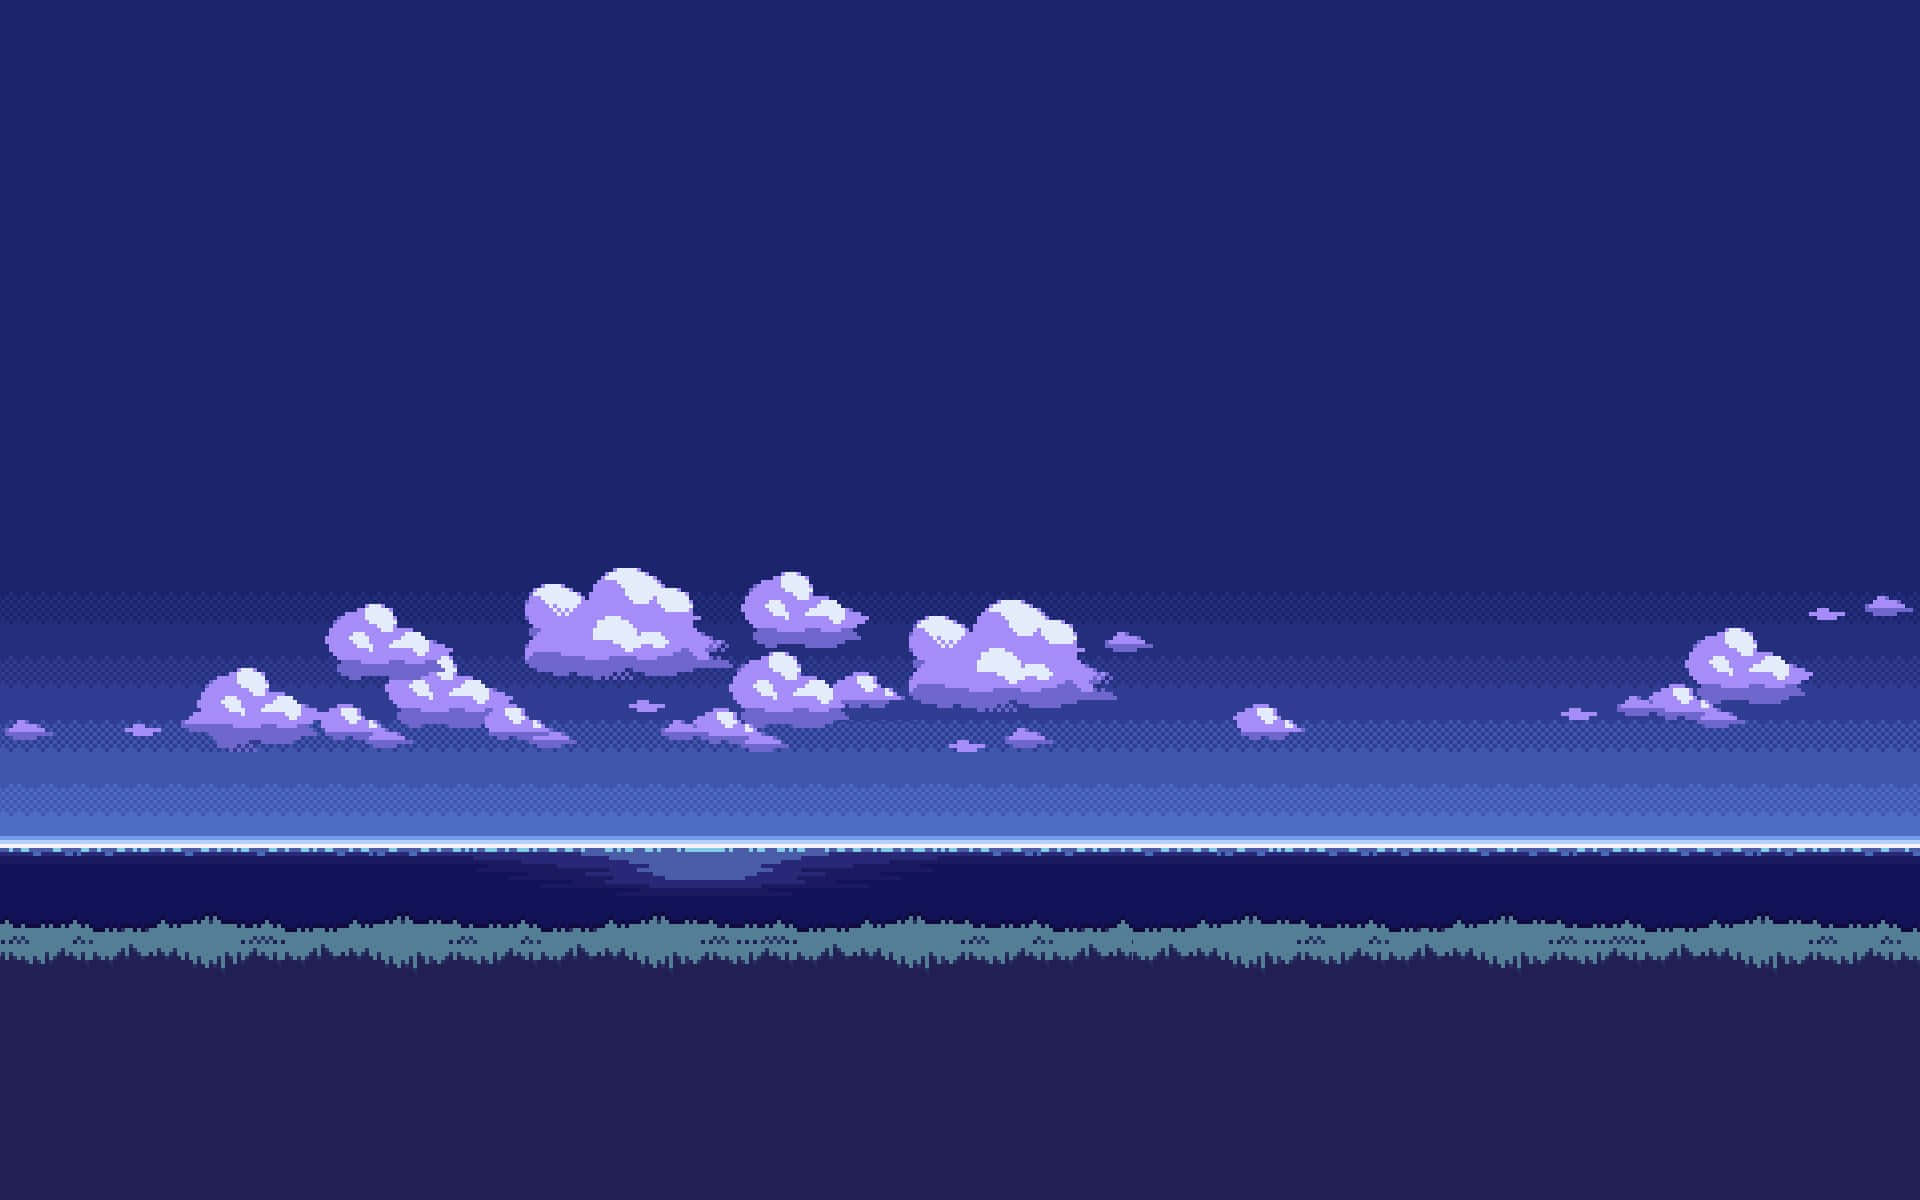 A Pixel Art Image Of A Sea And Clouds